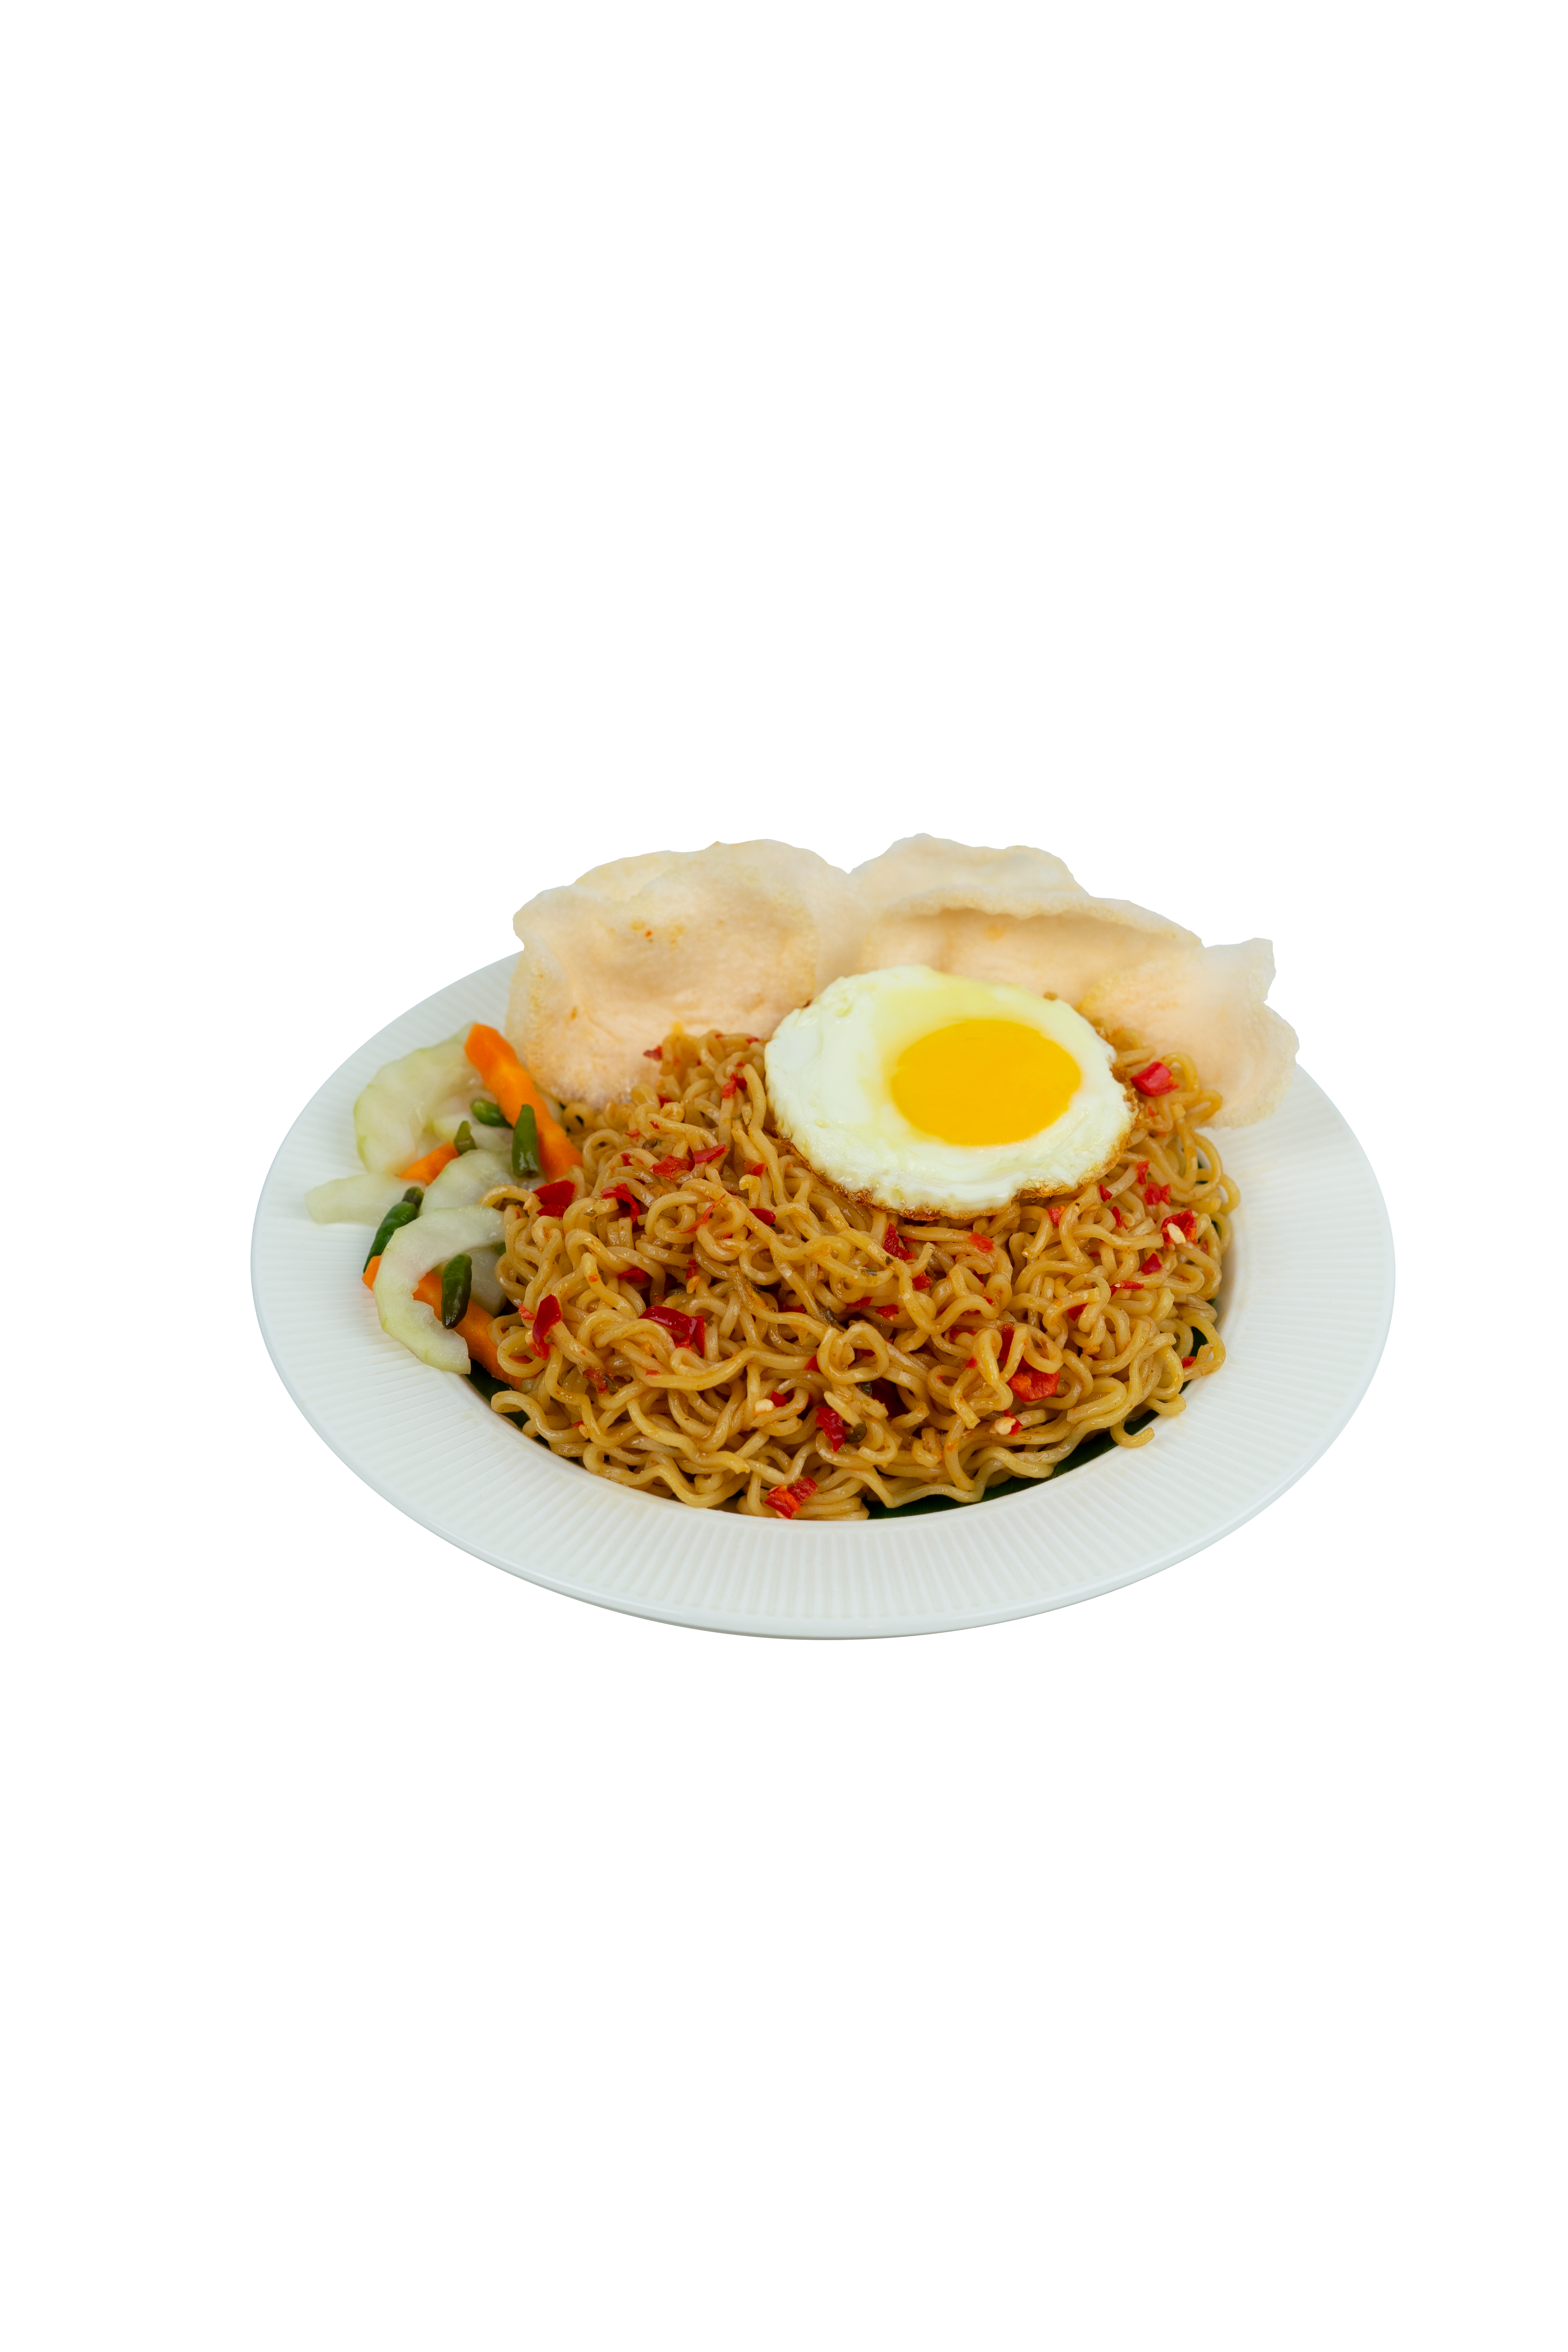 Image Product Indo Mie Goreng